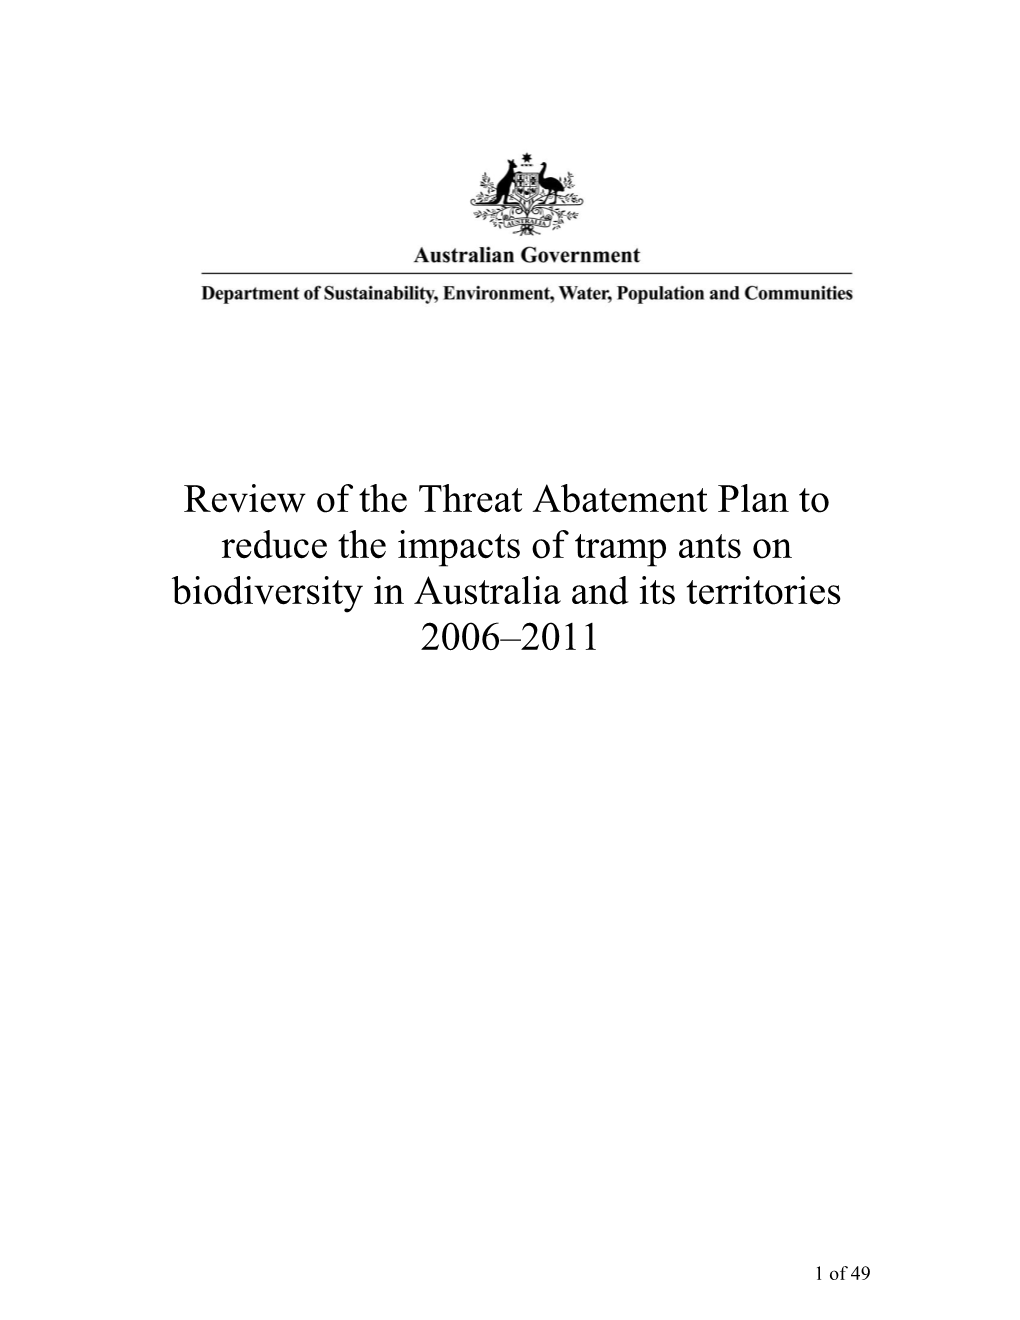 Review of the Threat Abatement Plan to Reduce the Impacts of Tramp Ants on Biodiversity in Australia and Its Territories 2006–2011